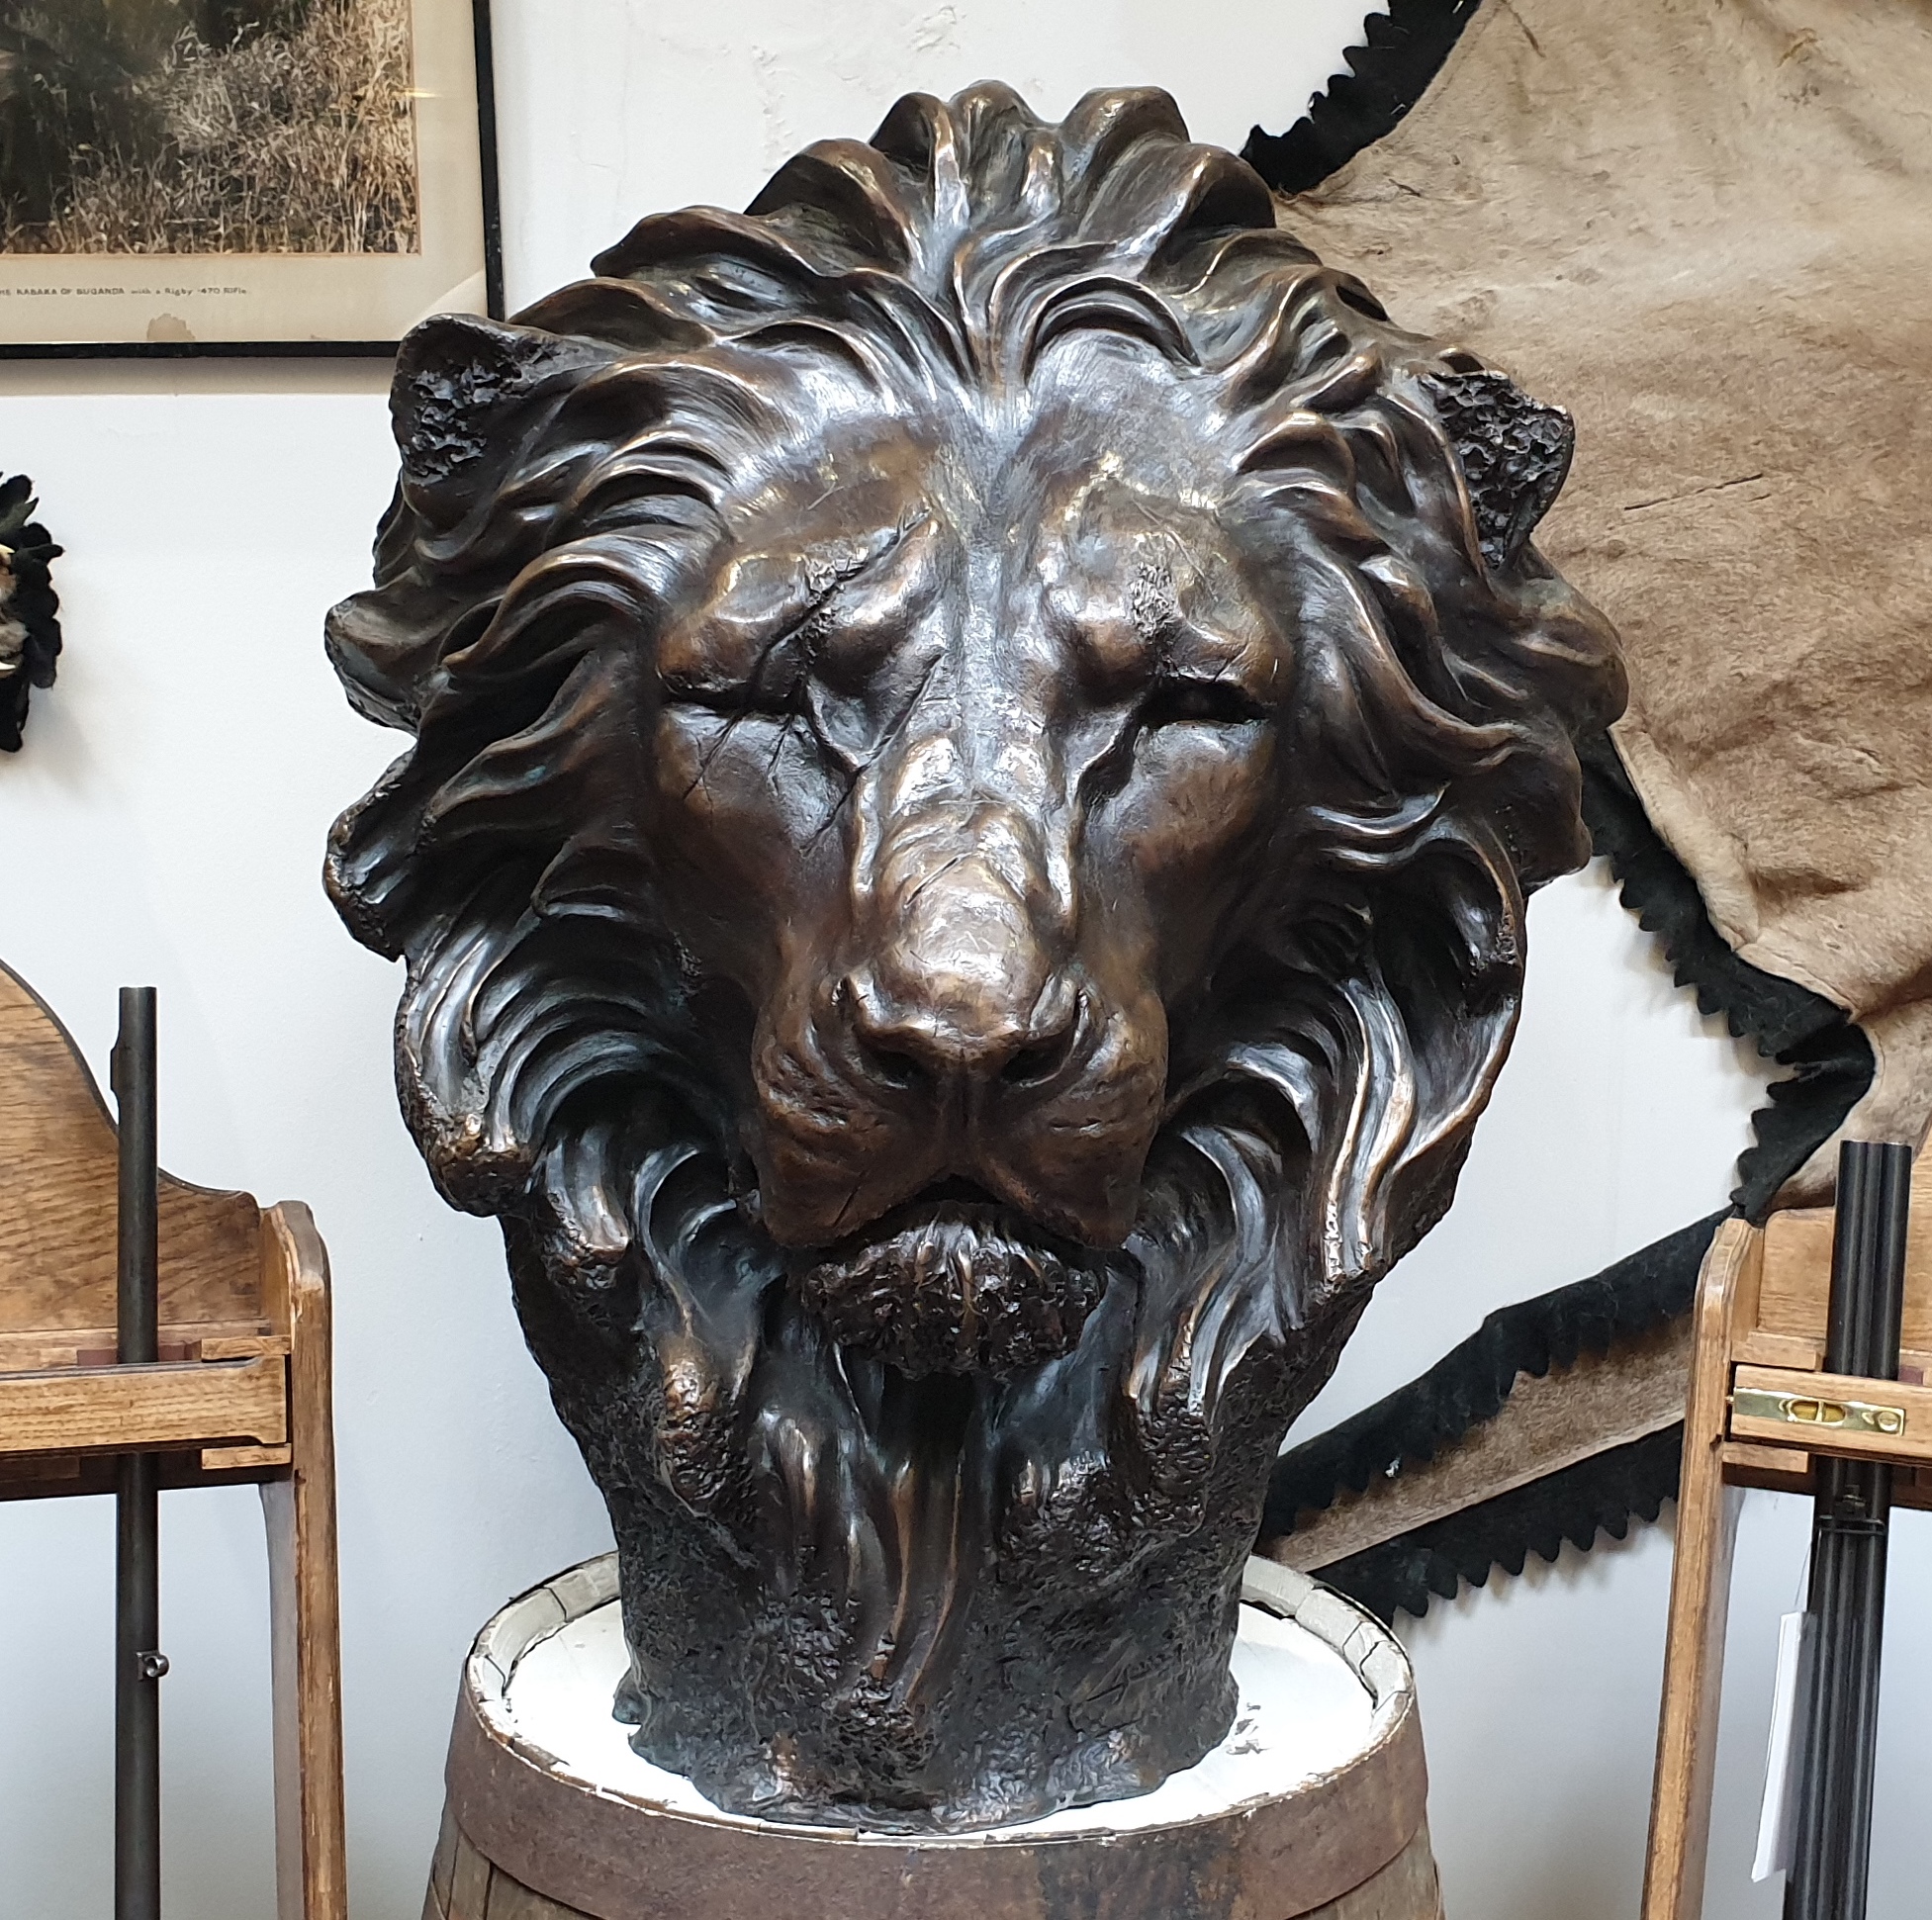 The price of the reign” Limited edition sculpture - John Rigby & Co.